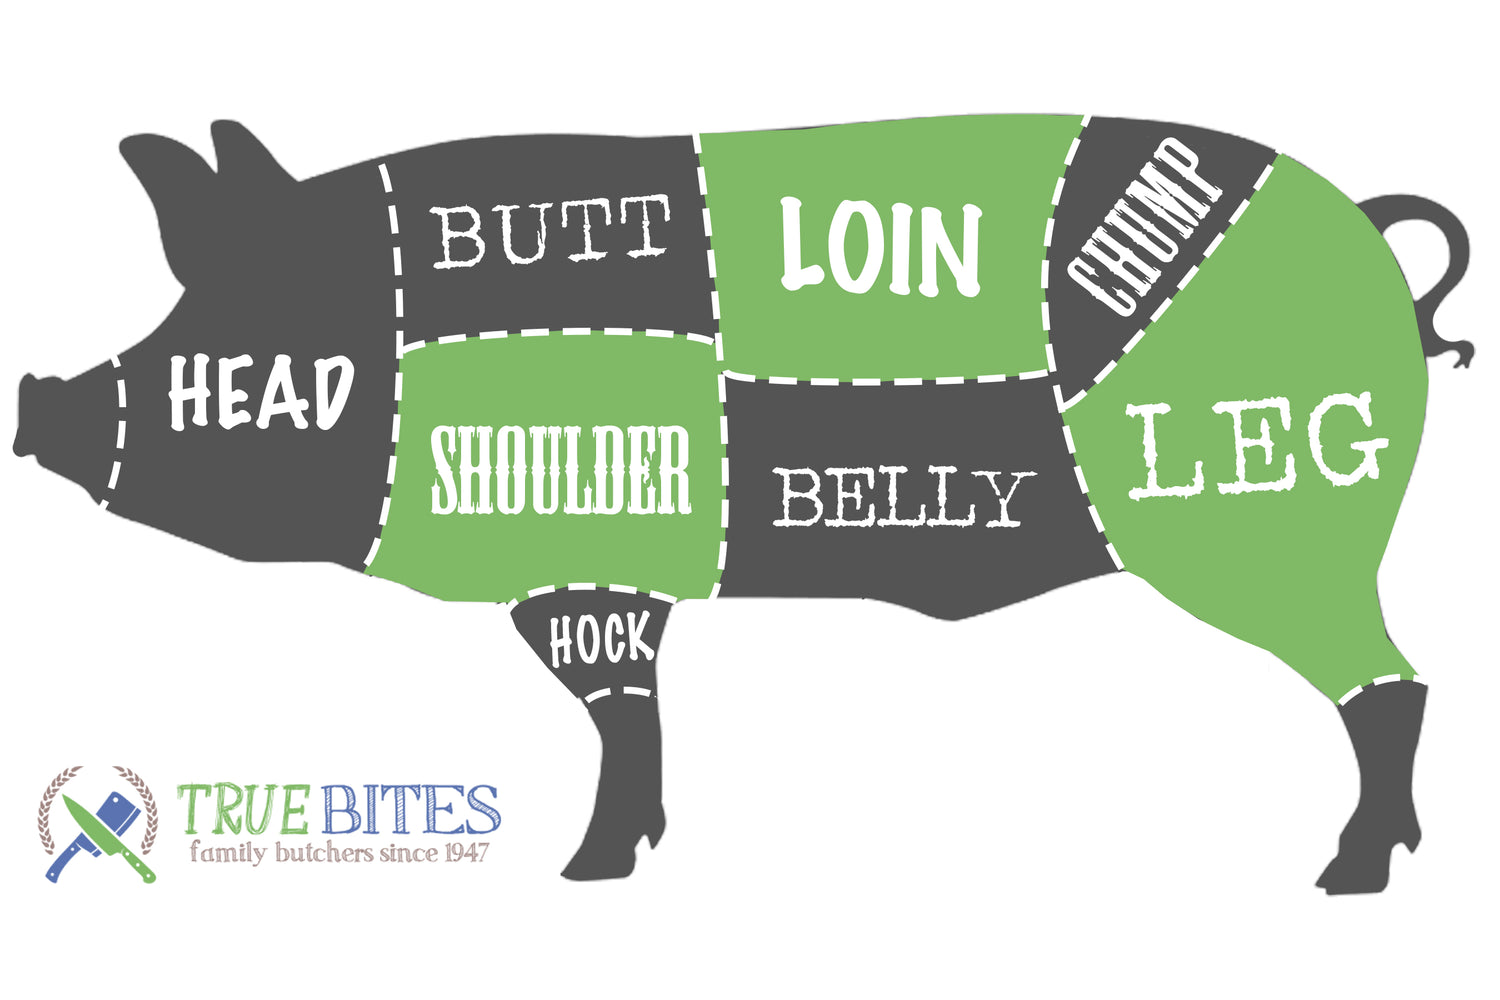 pork cutting diagram with leg, loin and shoulder highlighted